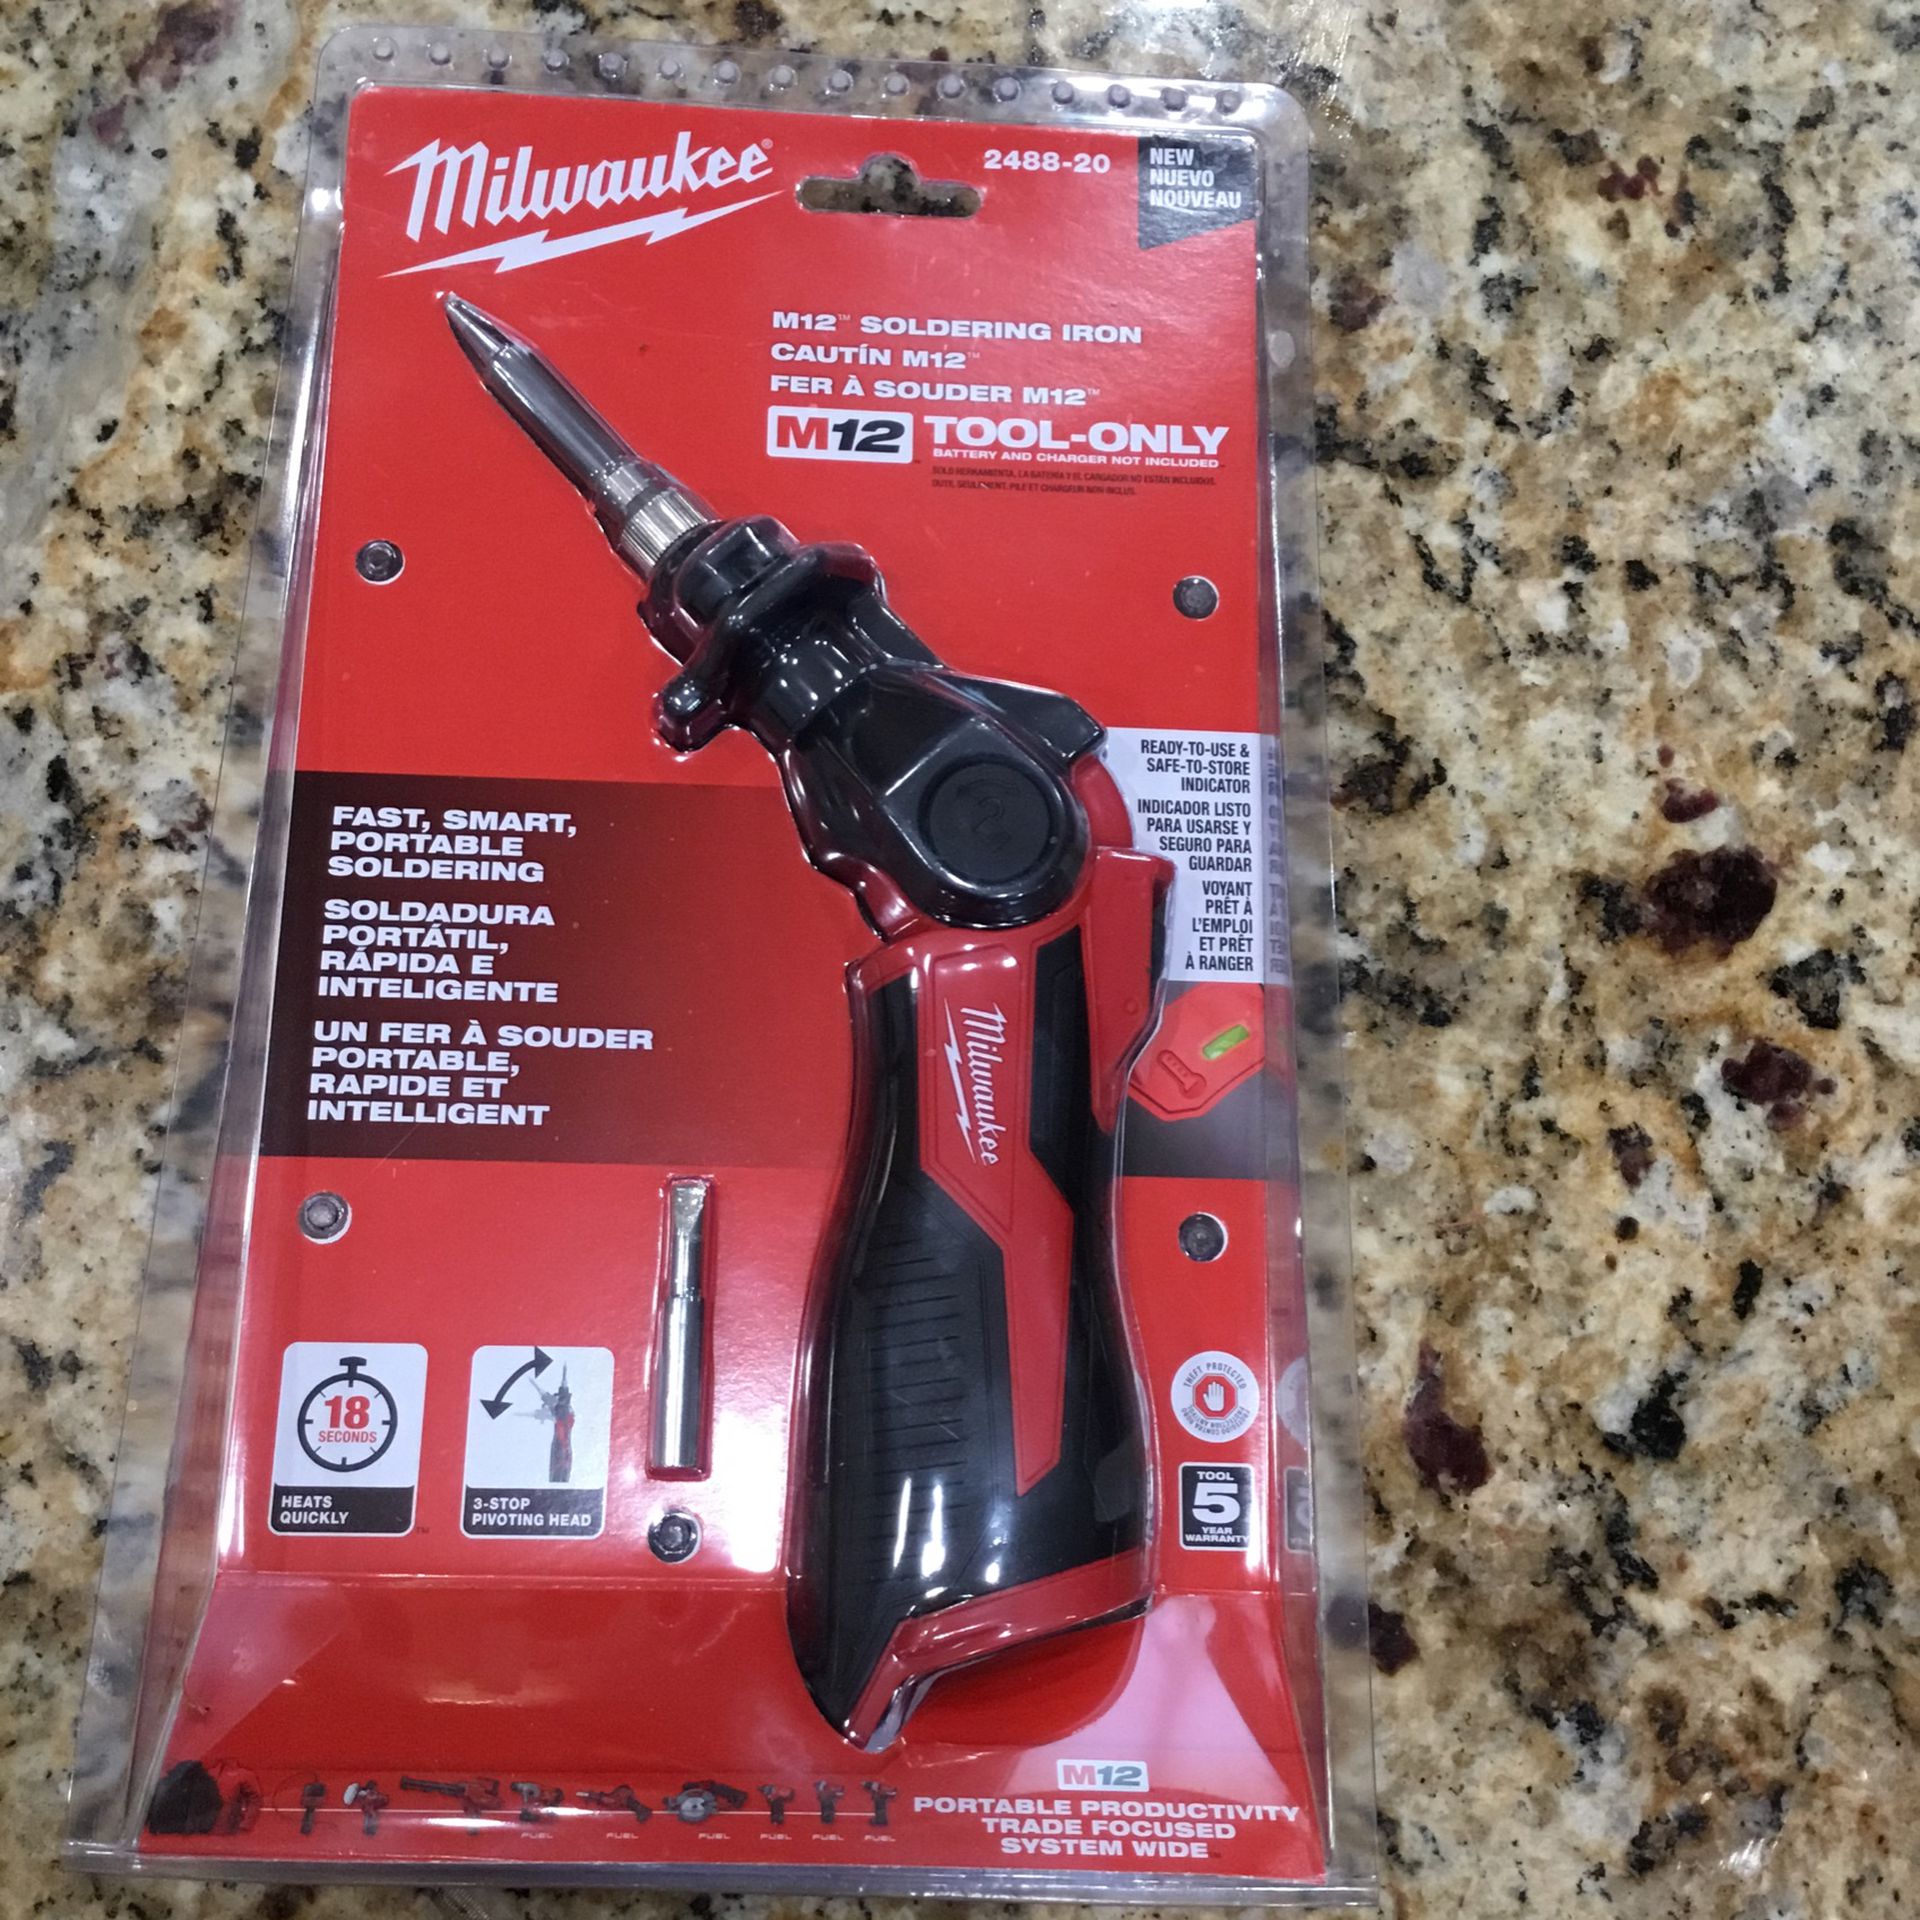 Selling Tools This Weekend (Saturday) ☀️. Milwaukee Brand NEW/Sealed M12 Cordless Soldering Iron, Just $65 👍🏽